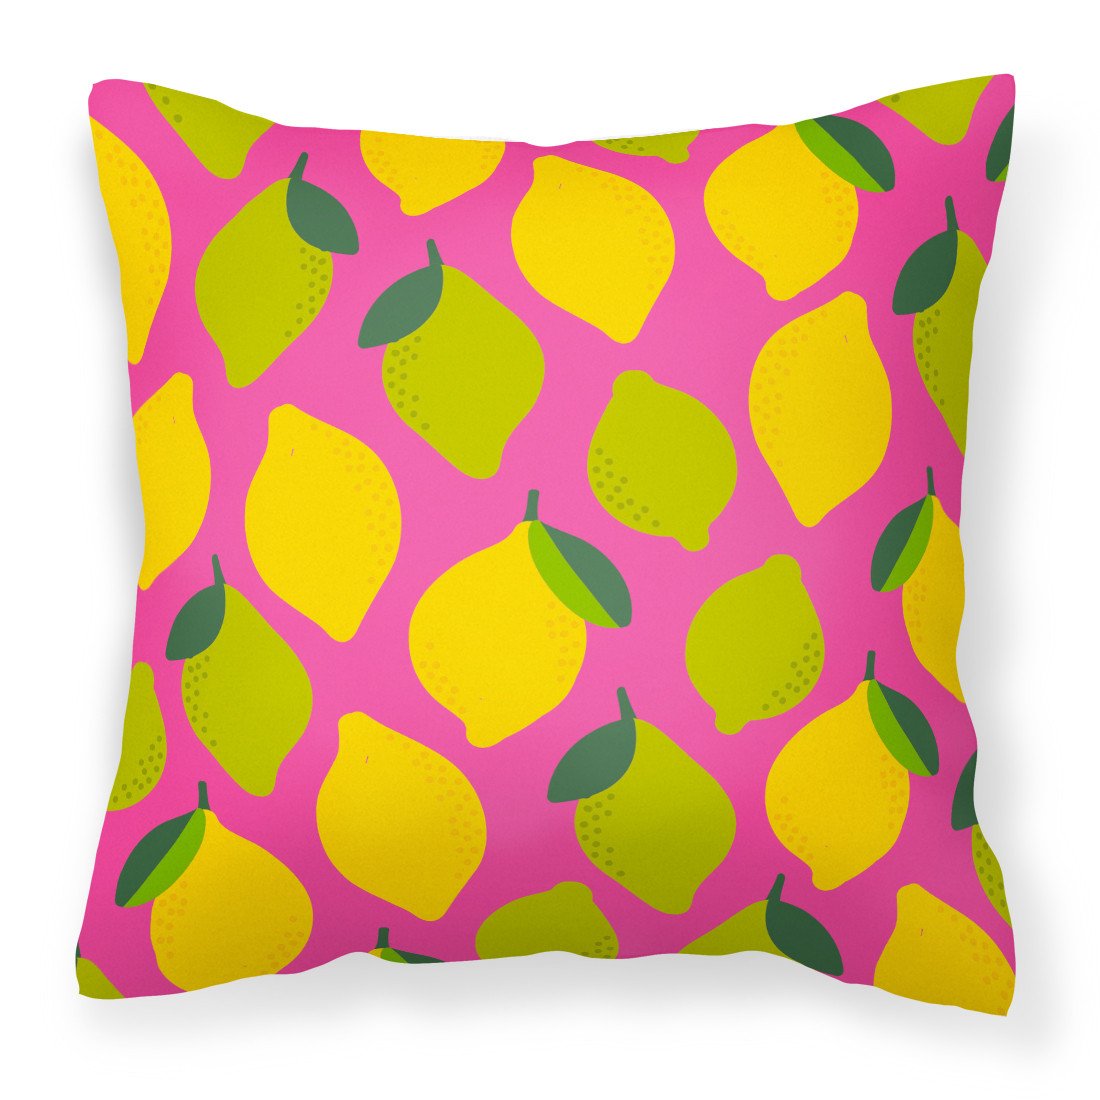 Lemons and Limes on Pink Fabric Decorative Pillow BB5143PW1818 by Caroline's Treasures